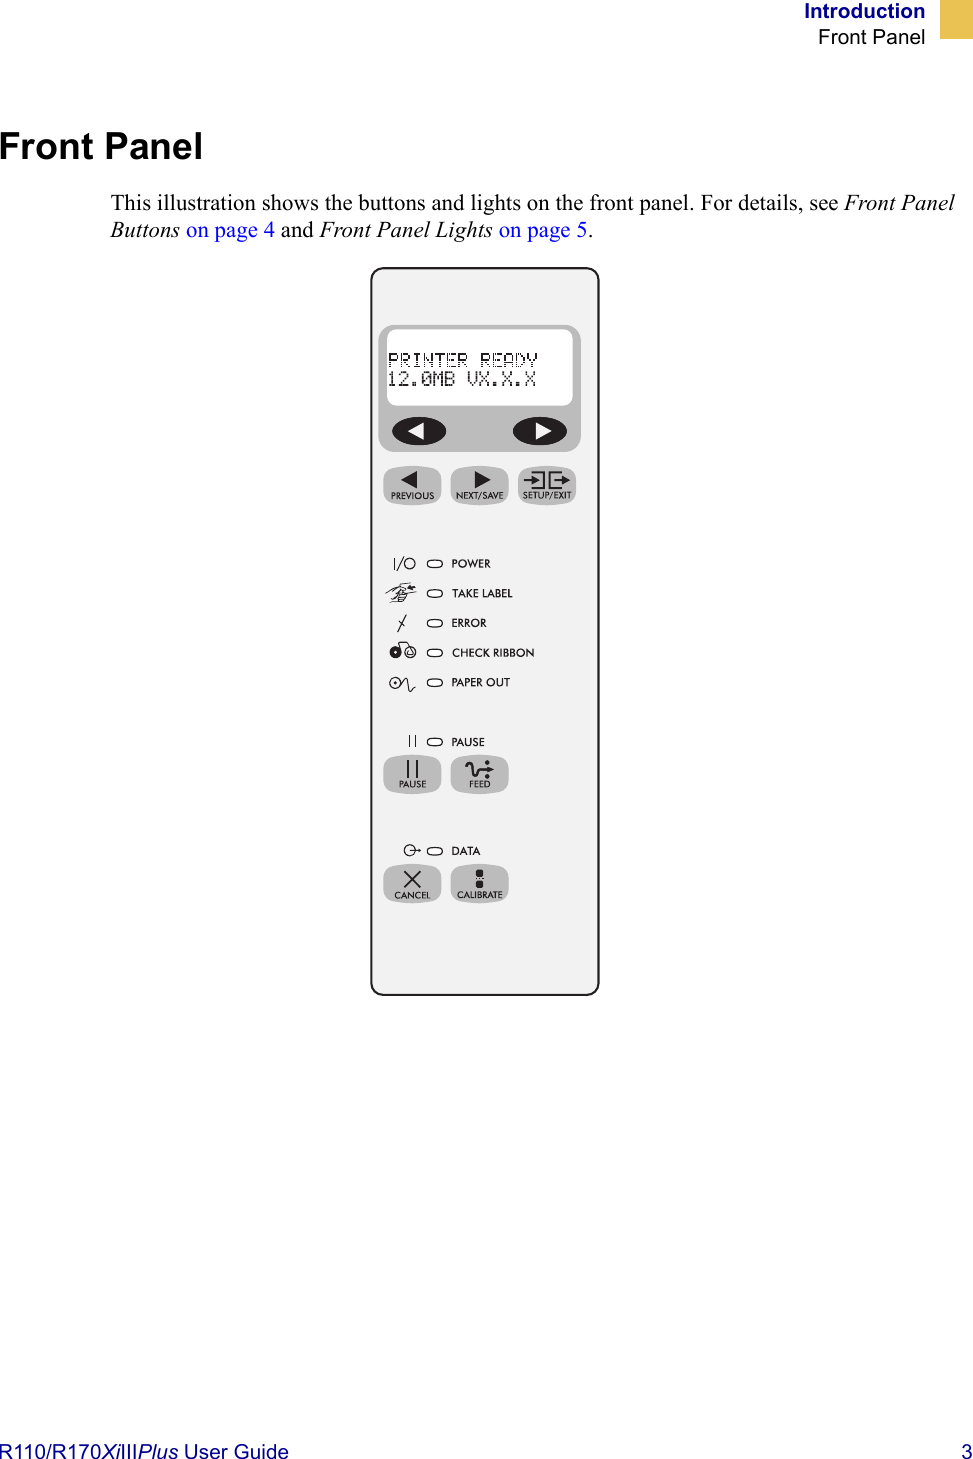 IntroductionFront PanelR110/R170XiIIIPlus User Guide  3Front PanelThis illustration shows the buttons and lights on the front panel. For details, see Front Panel Buttons on page 4 and Front Panel Lights on page 5. 